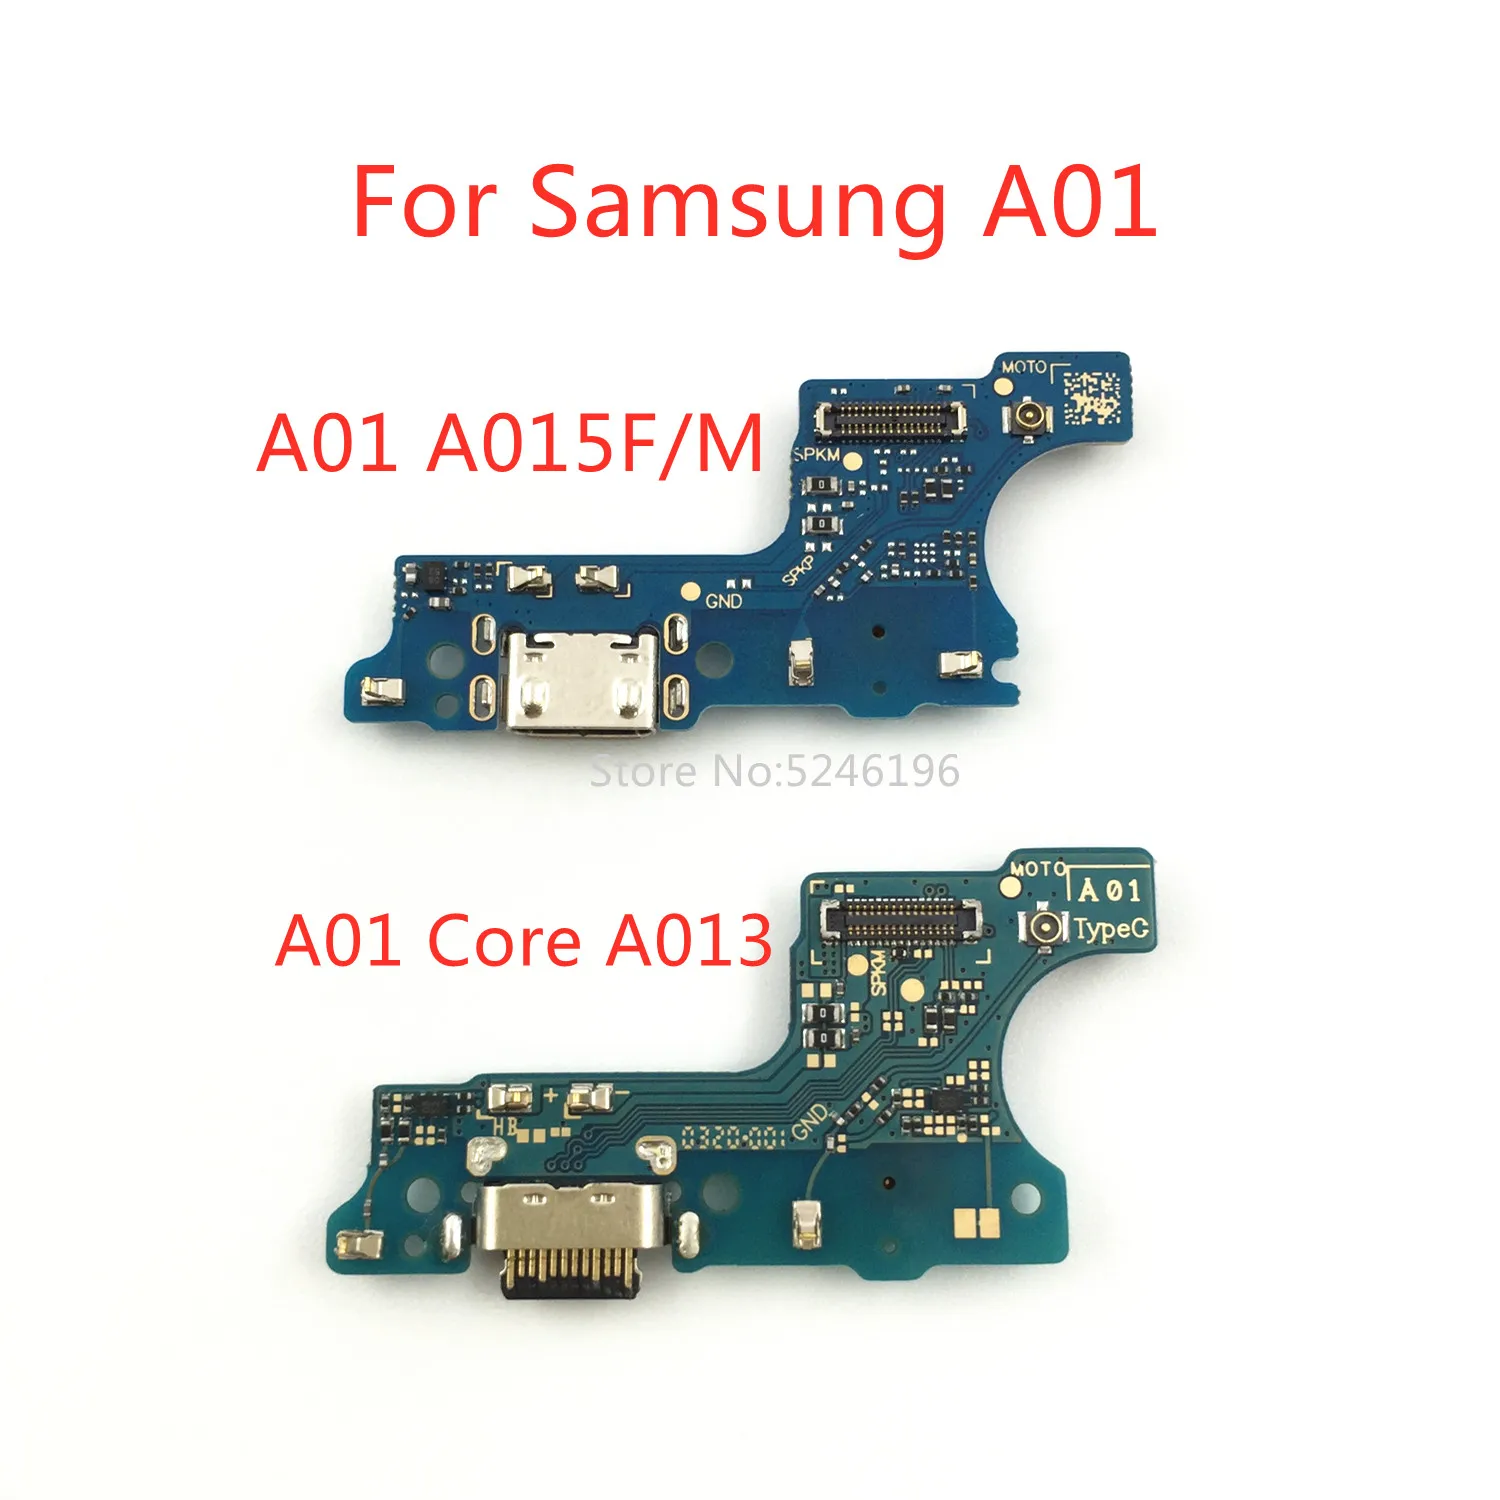 

1pcs For Samsung Galaxy A01 A015F A015M A01 Core A013 USB Charging Port Charger Base Connector Soft Cable Replace Parts